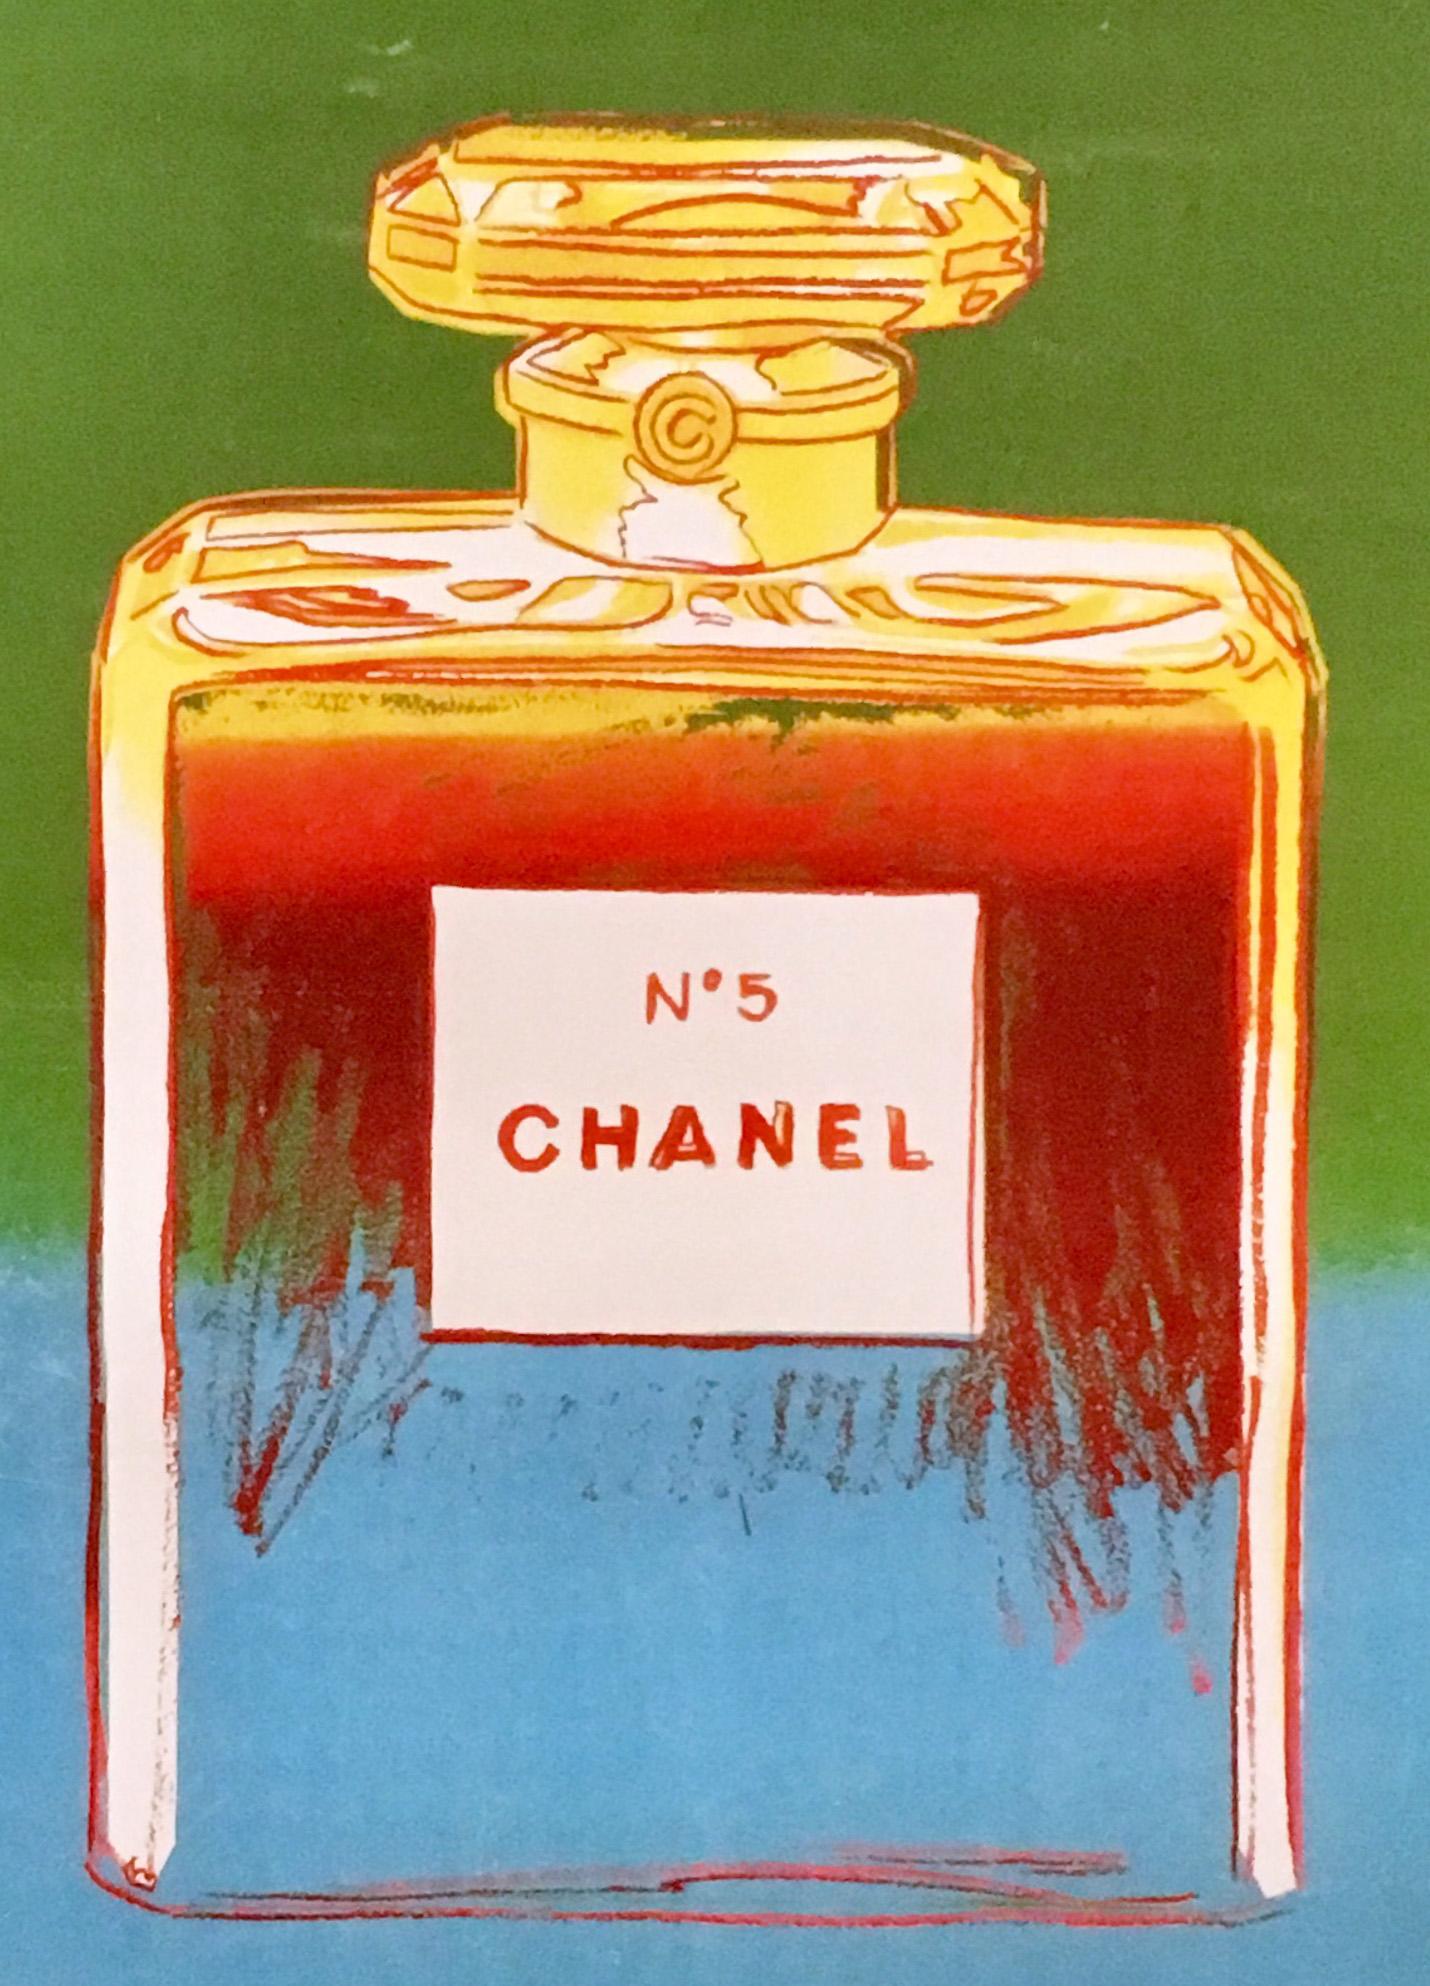 Chanel No. 5 Advertising Campaign Poster 1997 - Pop Art Print by (after) Andy Warhol